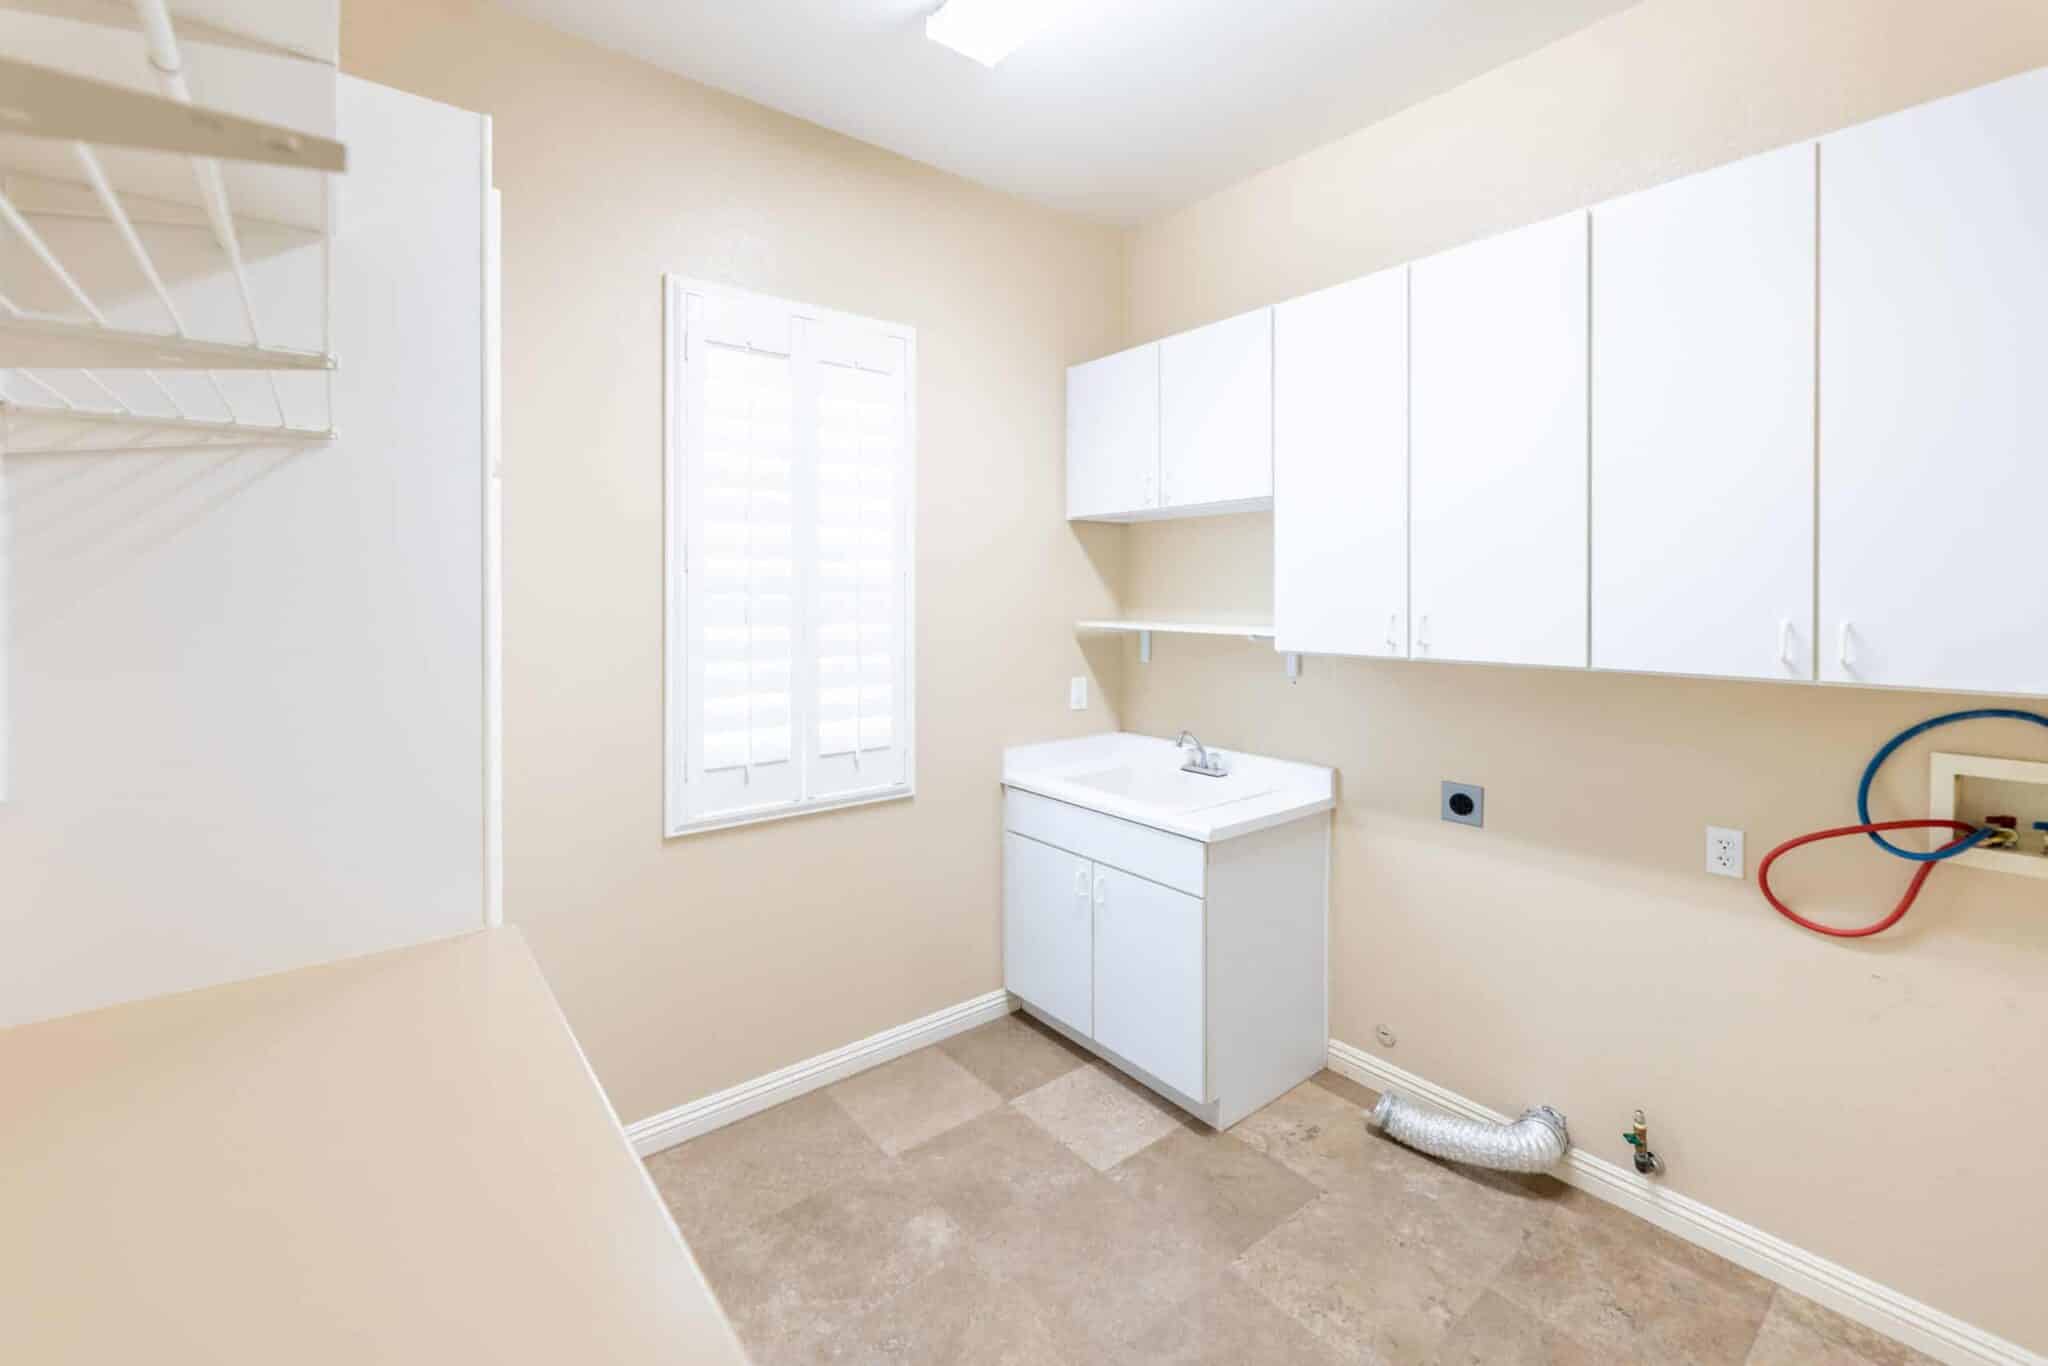 The downstairs laundry room with abundant cabinets, a closet, and utility sink.